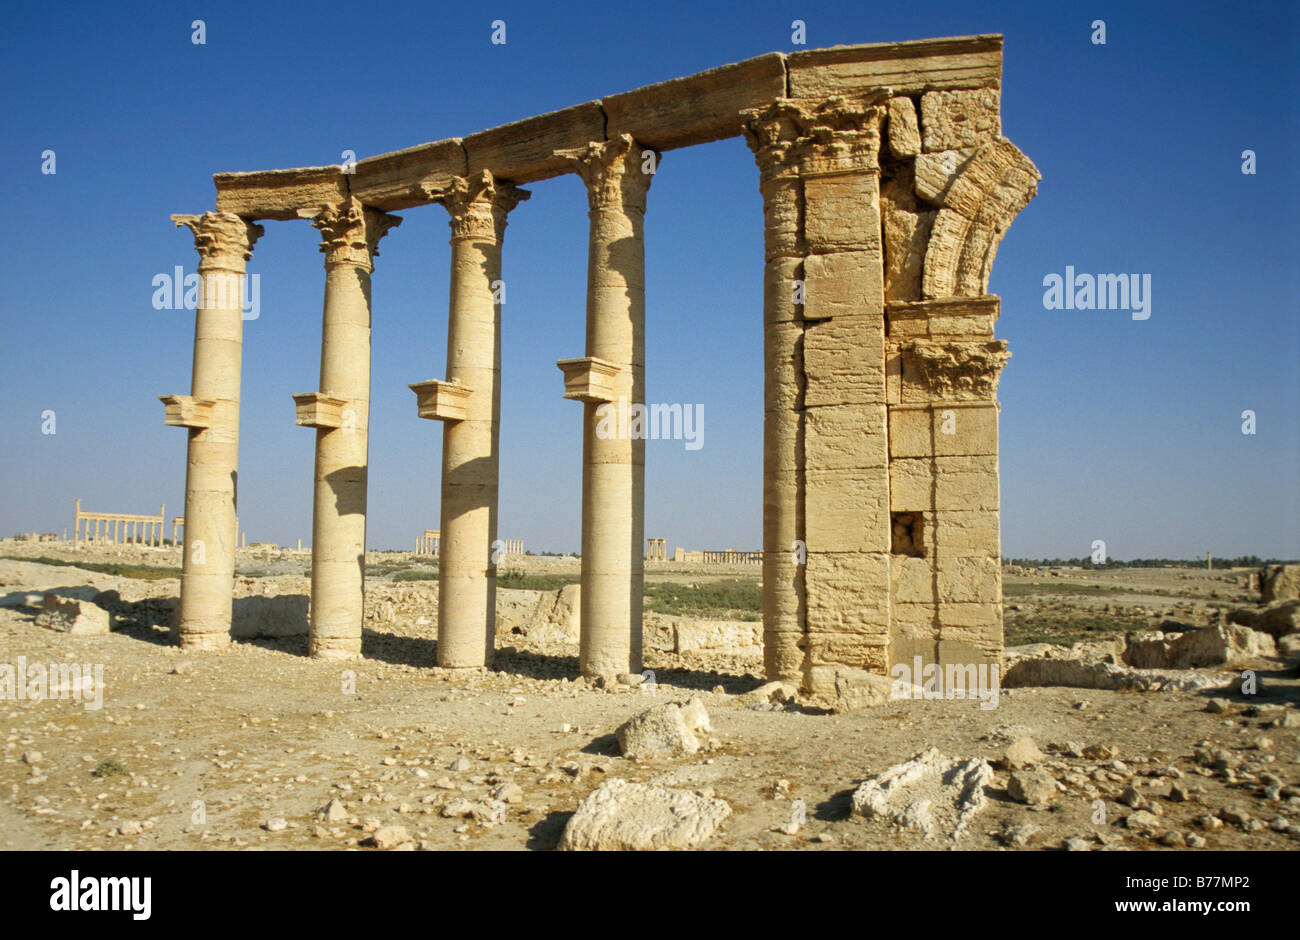 Ruins of the desert town Palmyra, Syria, Middle East, Orient Stock Photo